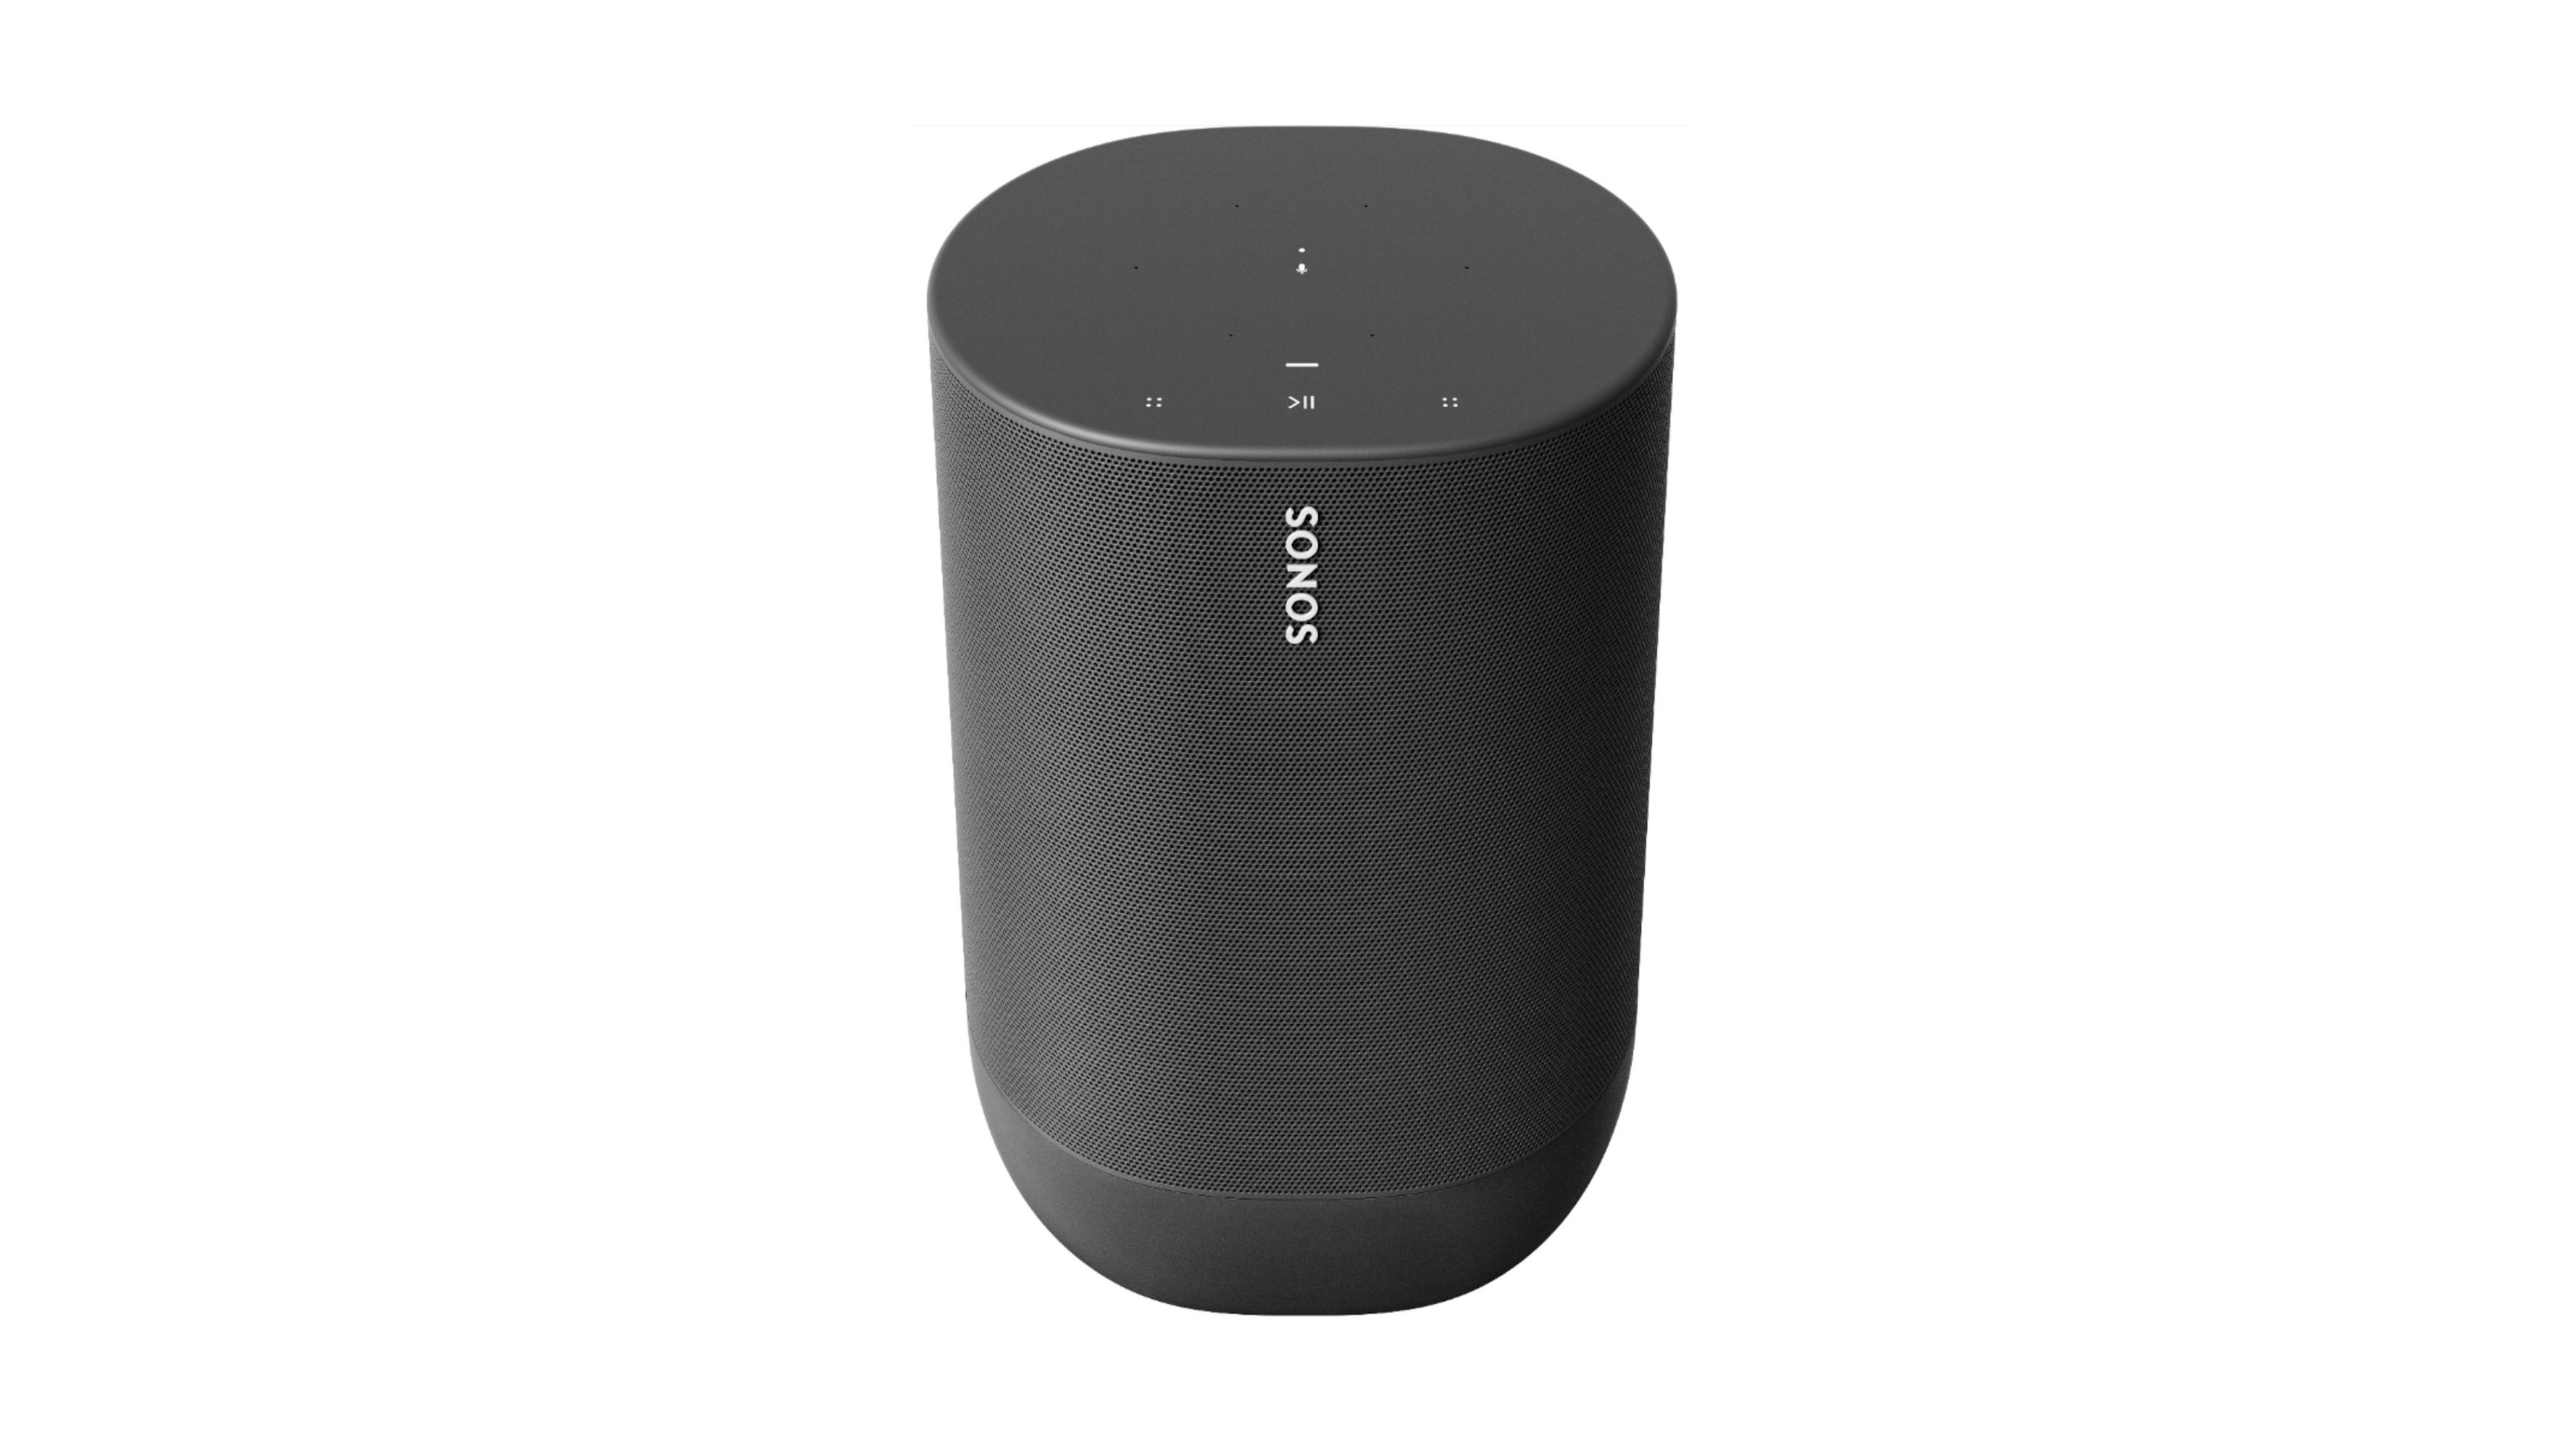 Trickle Gnaven elite Sonos to unveil Bluetooth speaker w/ AirPlay 2 this month - 9to5Mac